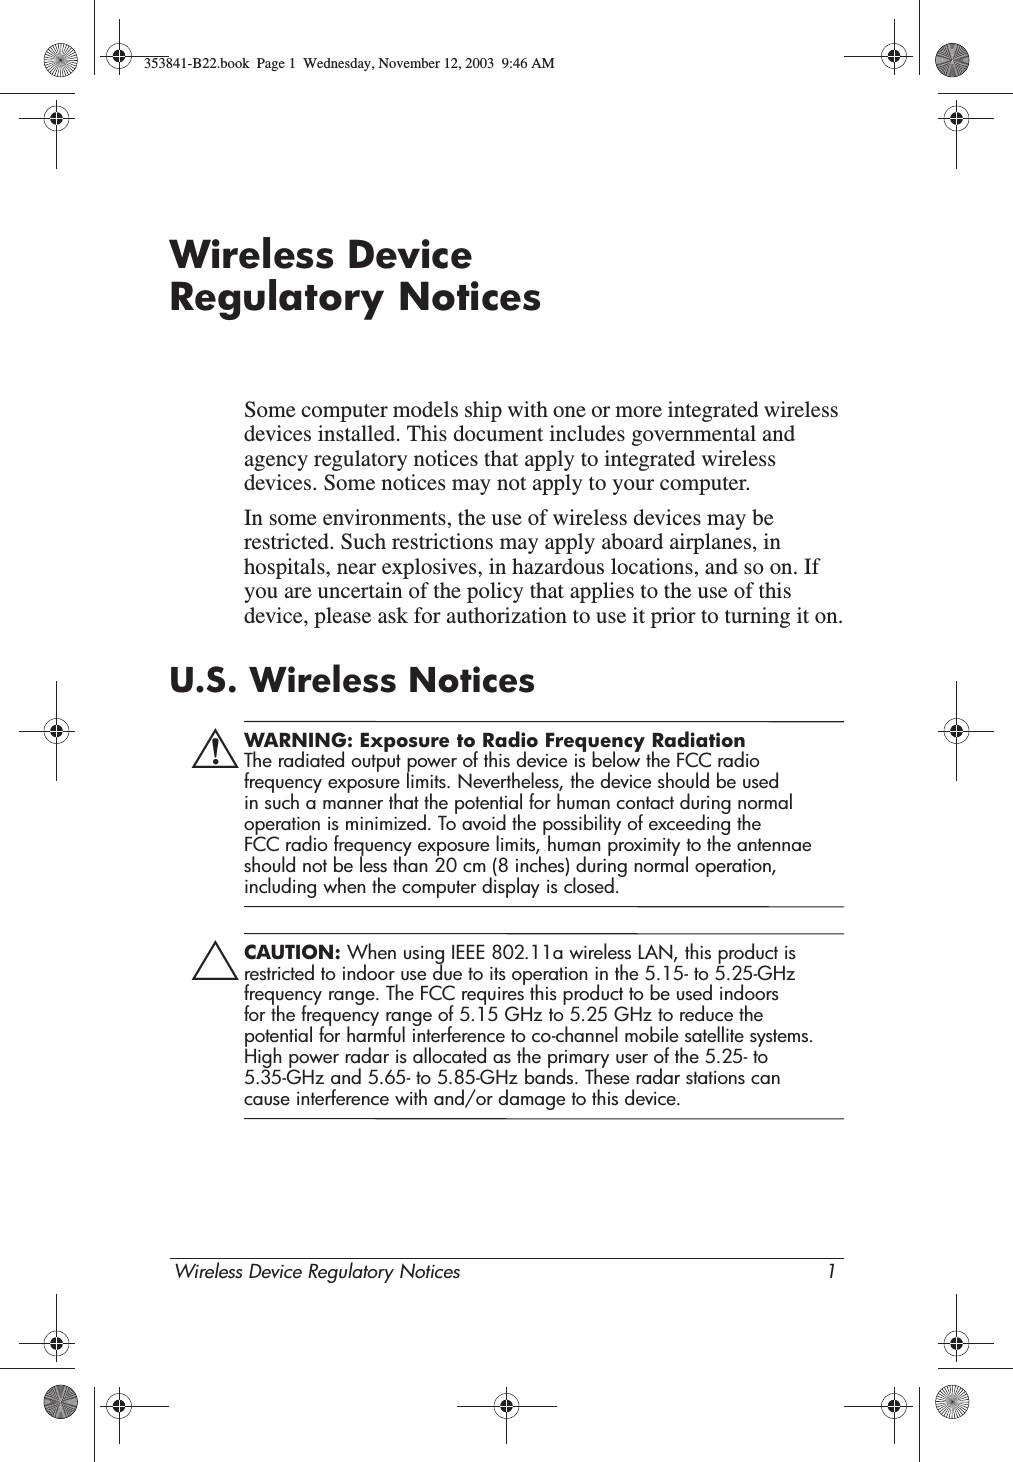 Wireless Device Regulatory Notices 1Wireless Device Regulatory NoticesSome computer models ship with one or more integrated wireless devices installed. This document includes governmental and agency regulatory notices that apply to integrated wireless devices. Some notices may not apply to your computer.In some environments, the use of wireless devices may be restricted. Such restrictions may apply aboard airplanes, in hospitals, near explosives, in hazardous locations, and so on. If you are uncertain of the policy that applies to the use of this device, please ask for authorization to use it prior to turning it on.U.S. Wireless NoticesÅWARNING: Exposure to Radio Frequency Radiation The radiated output power of this device is below the FCC radio frequency exposure limits. Nevertheless, the device should be used in such a manner that the potential for human contact during normal operation is minimized. To avoid the possibility of exceeding the FCC radio frequency exposure limits, human proximity to the antennae should not be less than 20 cm (8 inches) during normal operation, including when the computer display is closed.ÄCAUTION: When using IEEE 802.11a wireless LAN, this product is restricted to indoor use due to its operation in the 5.15- to 5.25-GHz frequency range. The FCC requires this product to be used indoors for the frequency range of 5.15 GHz to 5.25 GHz to reduce the potential for harmful interference to co-channel mobile satellite systems. High power radar is allocated as the primary user of the 5.25- to 5.35-GHz and 5.65- to 5.85-GHz bands. These radar stations can cause interference with and/or damage to this device.353841-B22.book  Page 1  Wednesday, November 12, 2003  9:46 AM